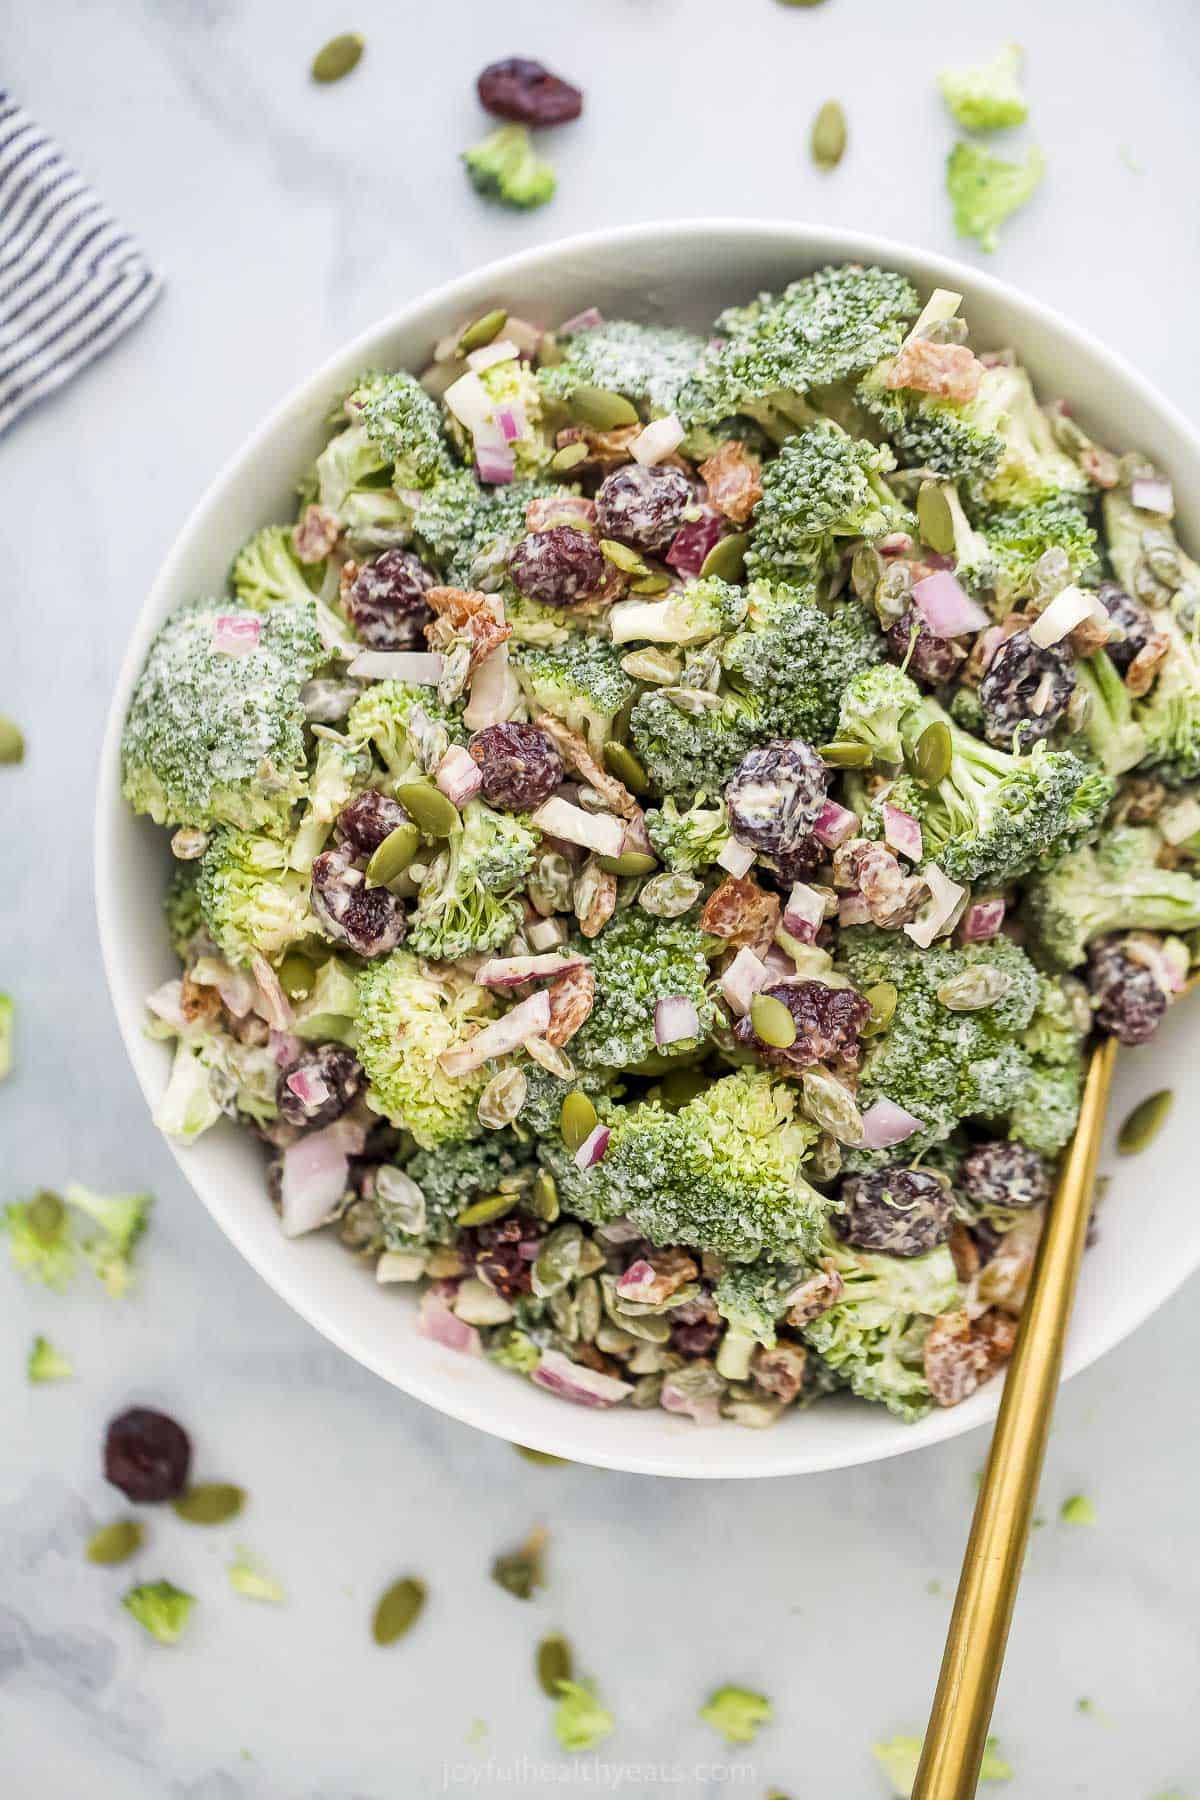 A big bowl of broccoli salad sitting on a marble kitchen countertop